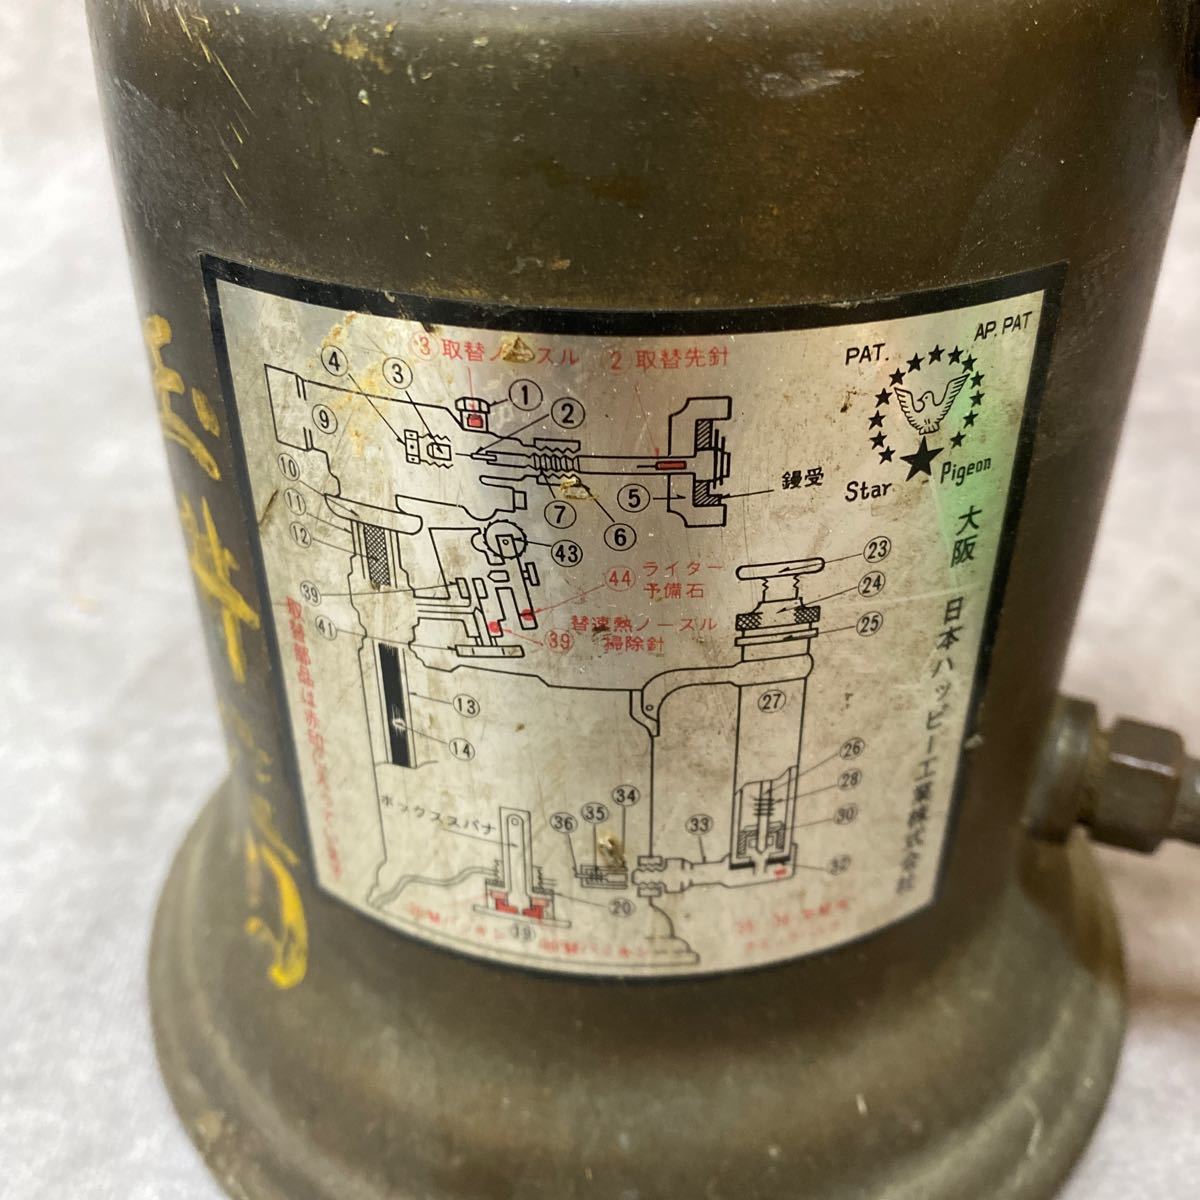  gasoline torch lamp Star Pigeon Japan happy industry that time thing old tool fire causes outdoor operation not yet verification secondhand goods present condition goods Junk 